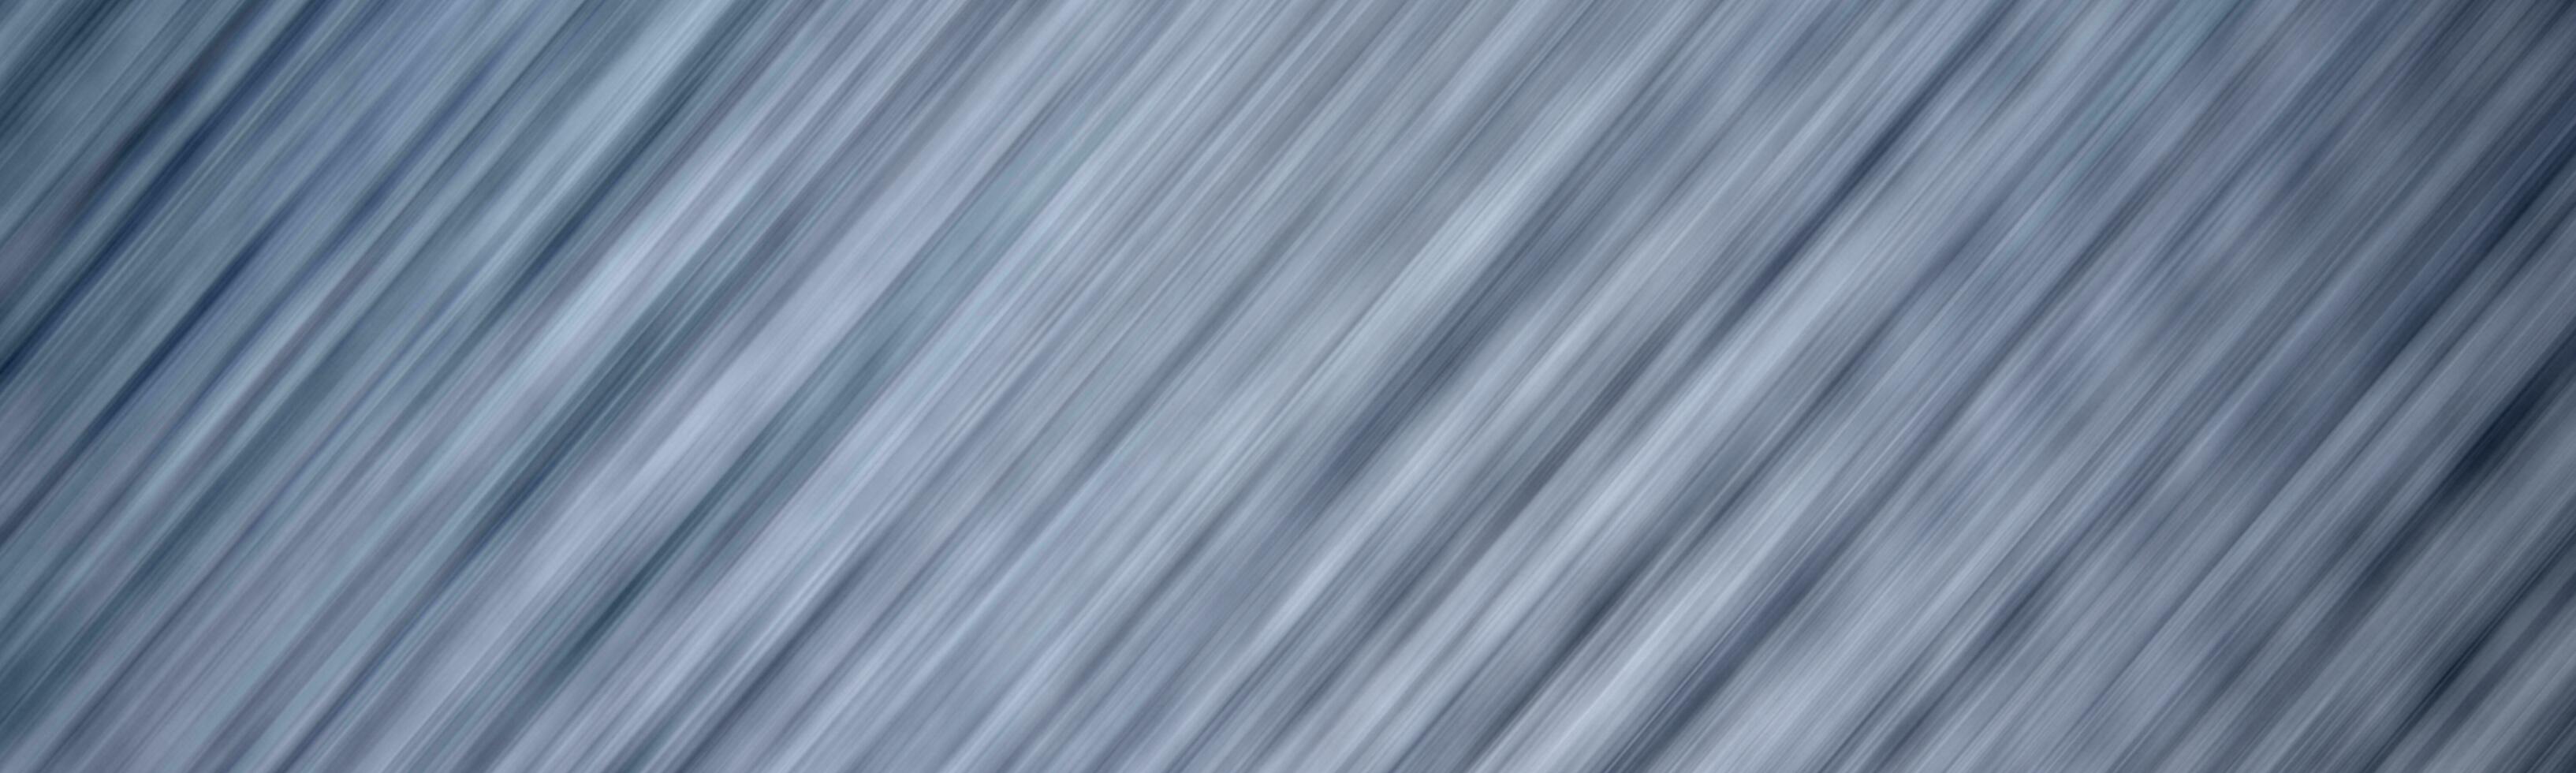 abstract background with blurred lines of water photo